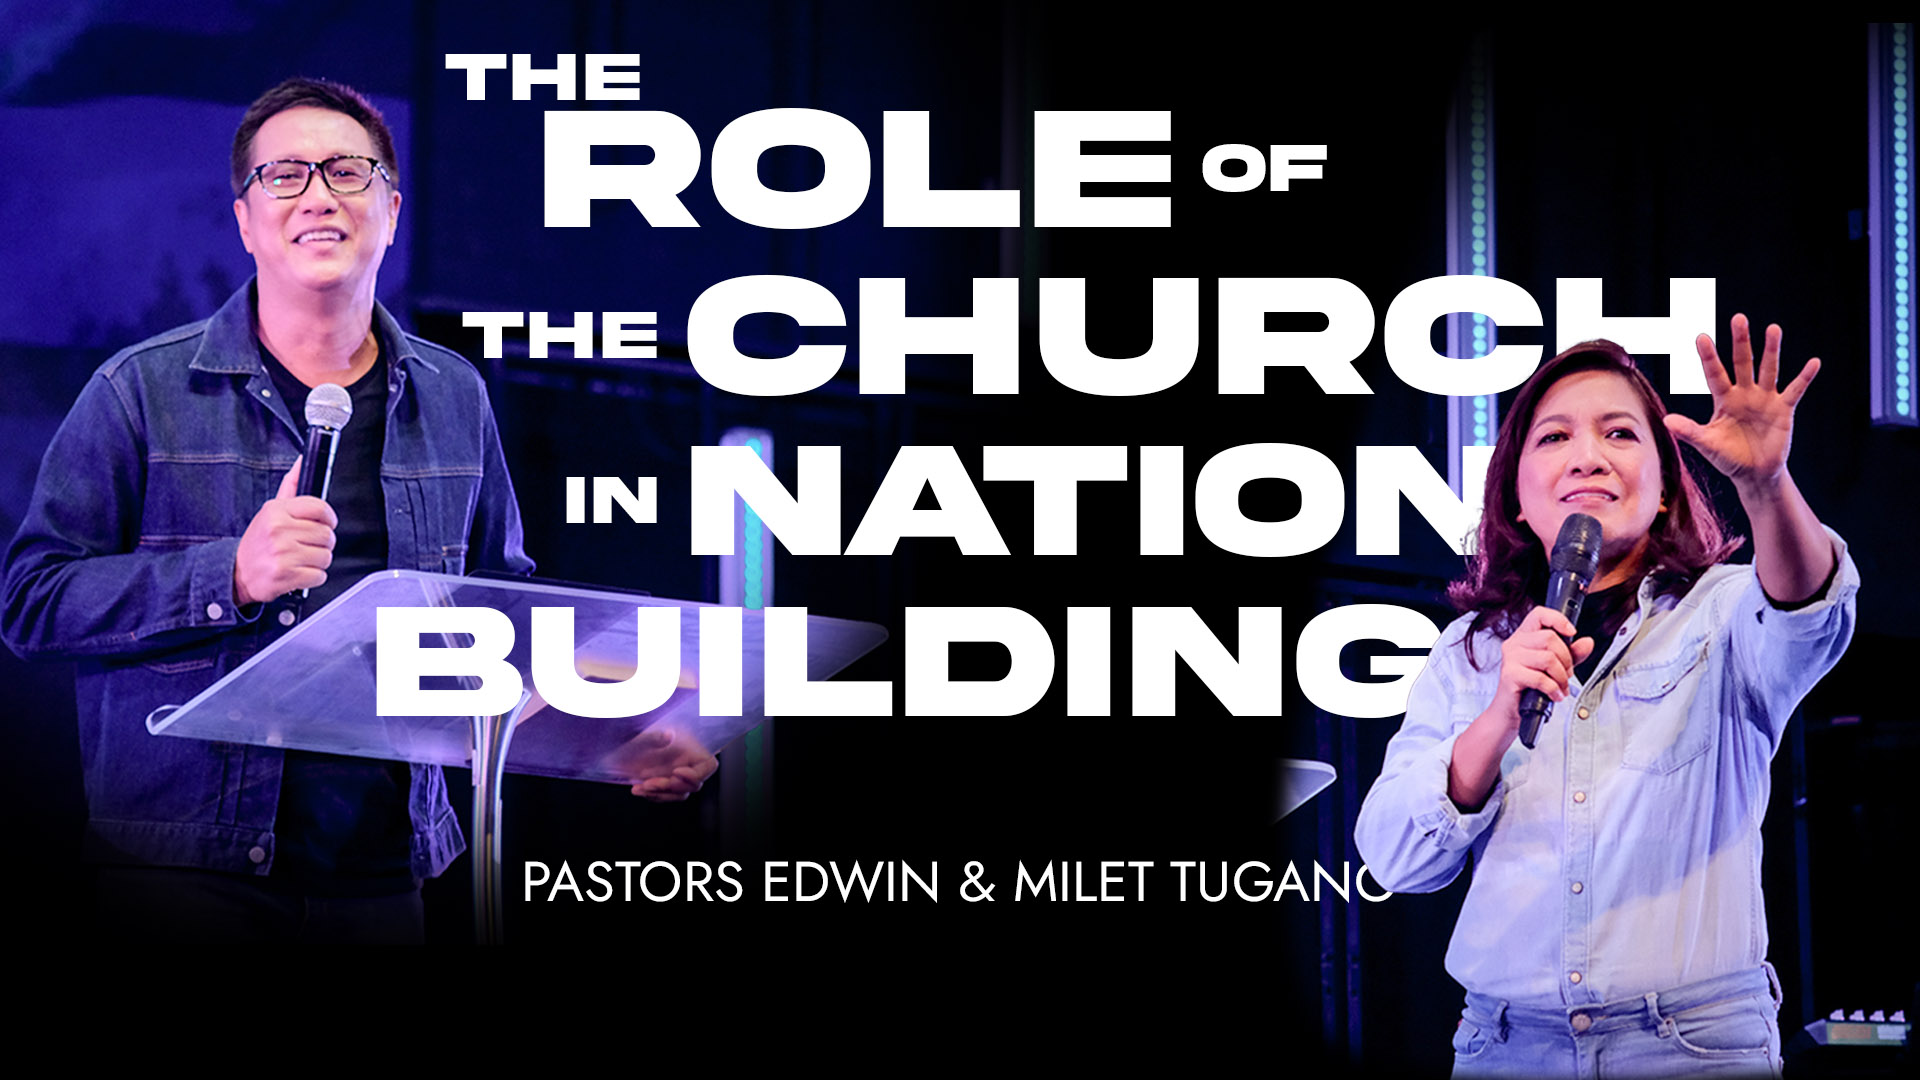 THE ROLE OF THE CHURCH IN NATION BUILDING Image